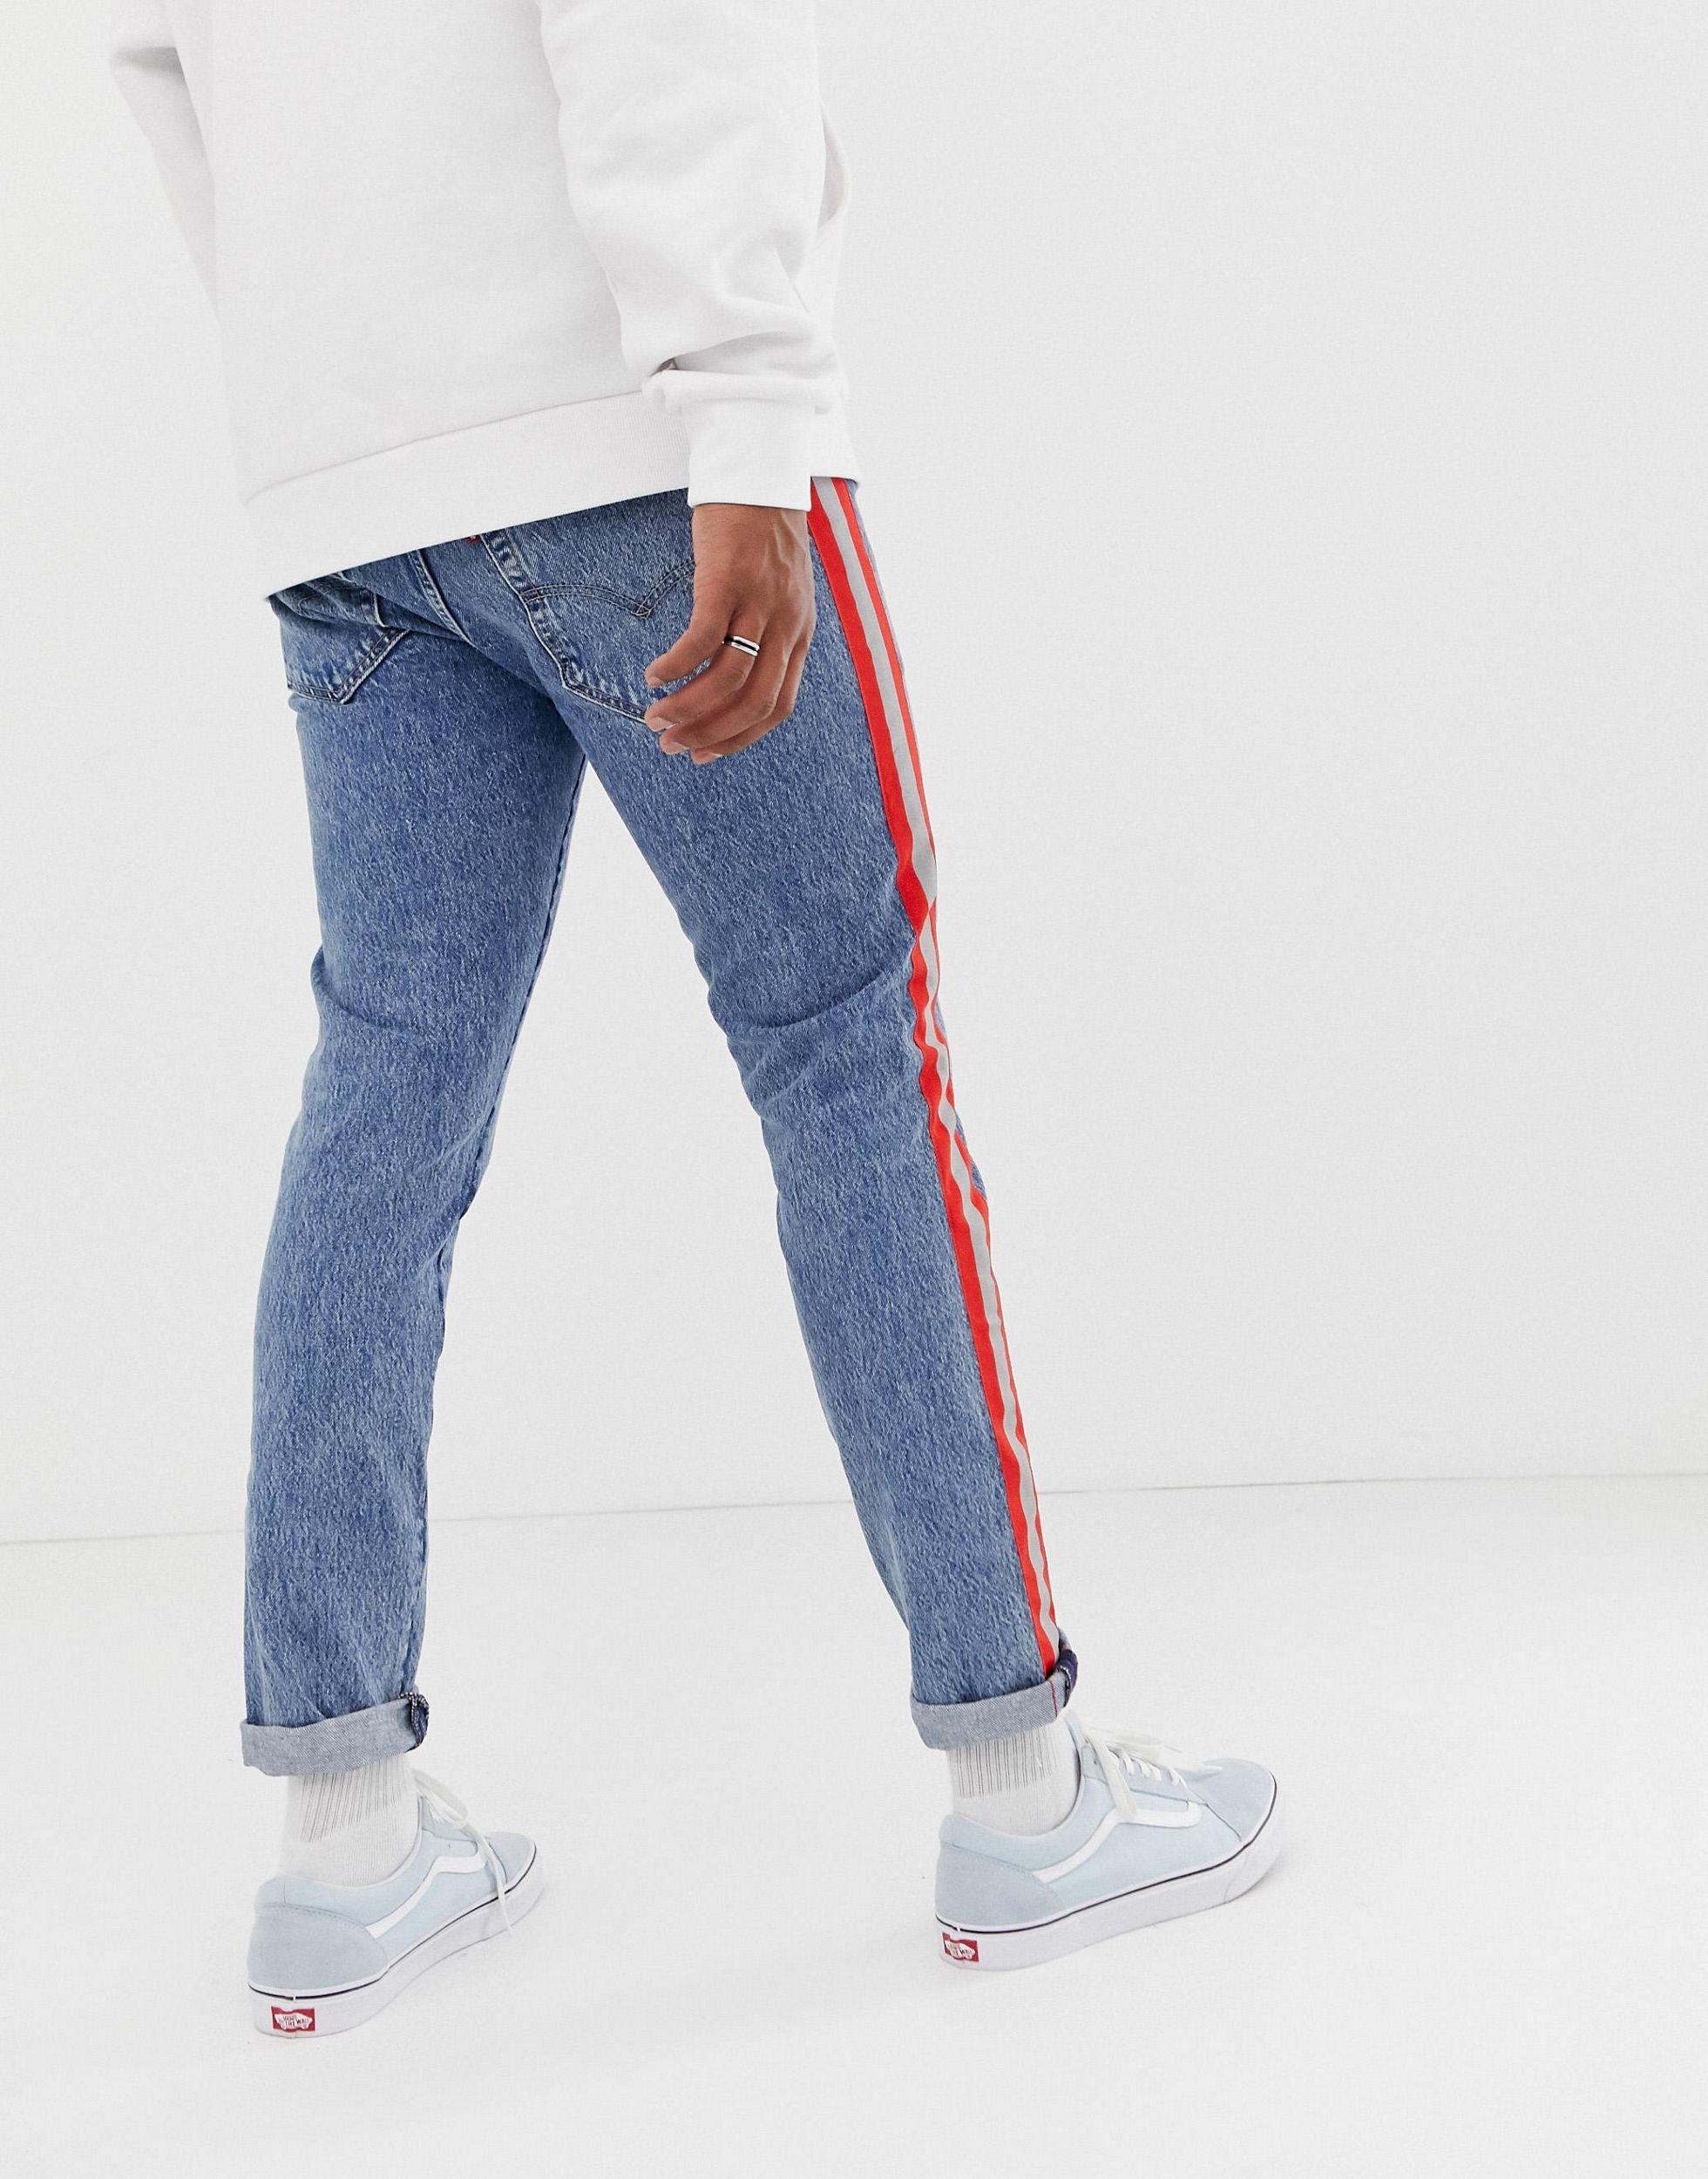 levi's jeans with stripe down the side